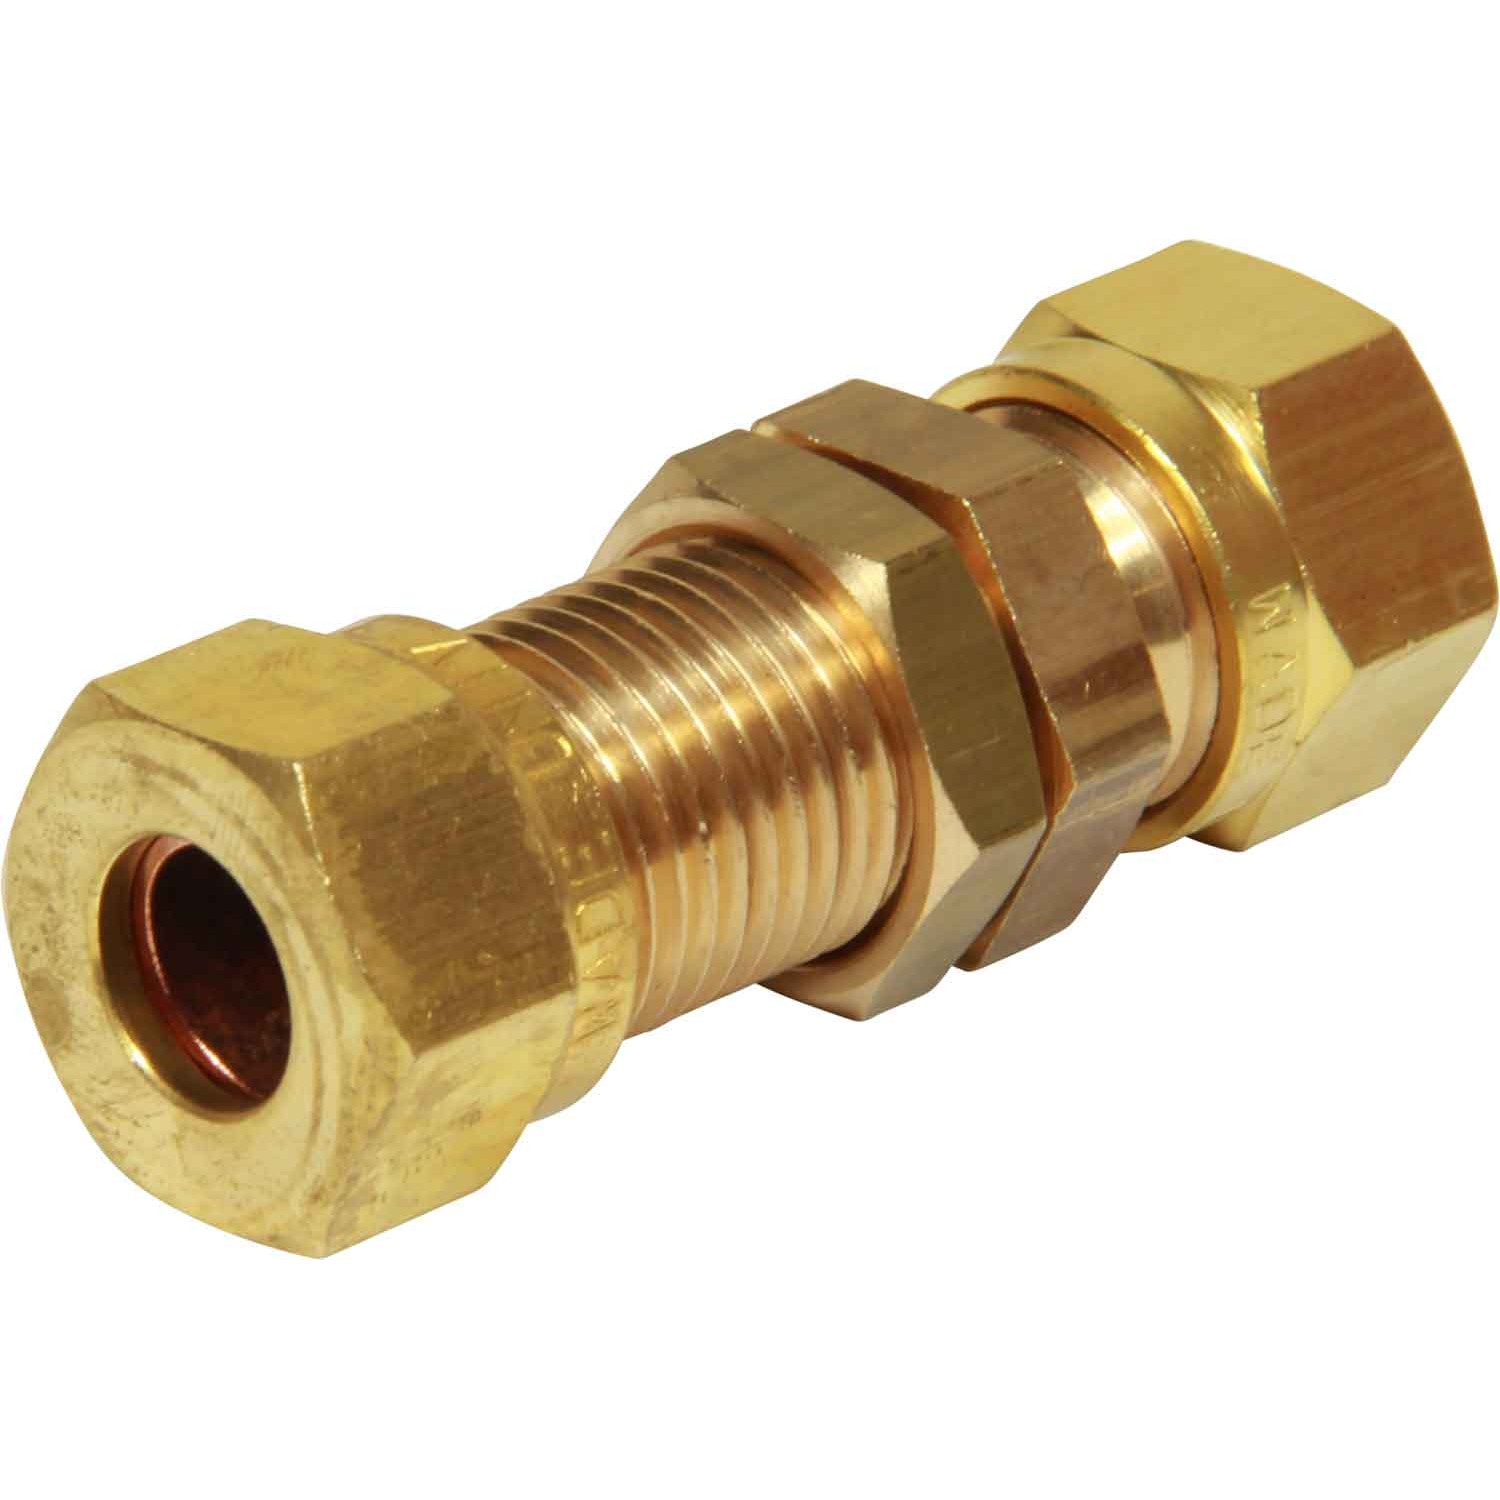 WADE BRASS COMPRESSION FITTINGS 08MM OD X 10MM EQUAL ENDED BULKHEAD 9-00689 